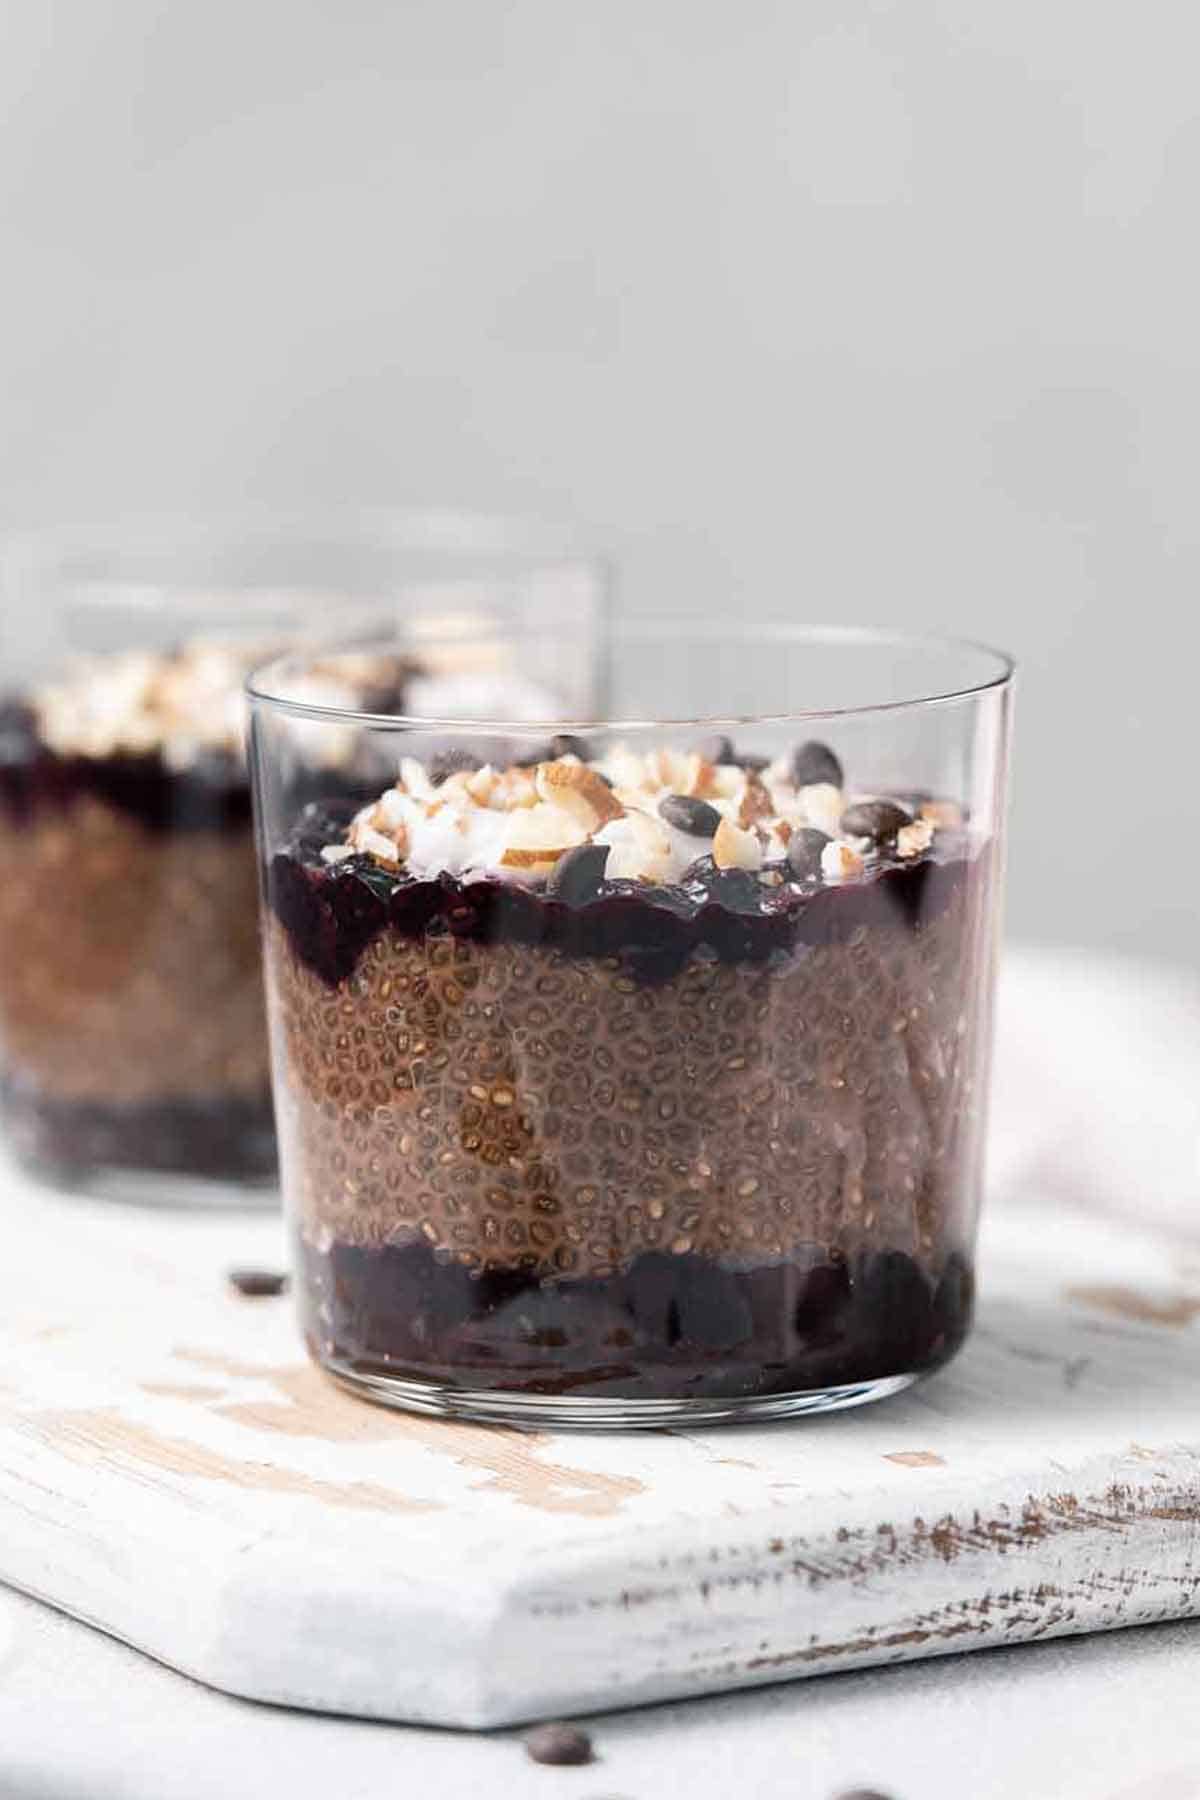 Two glasses of chocolate blueberry chia pudding with one in front and in focus.